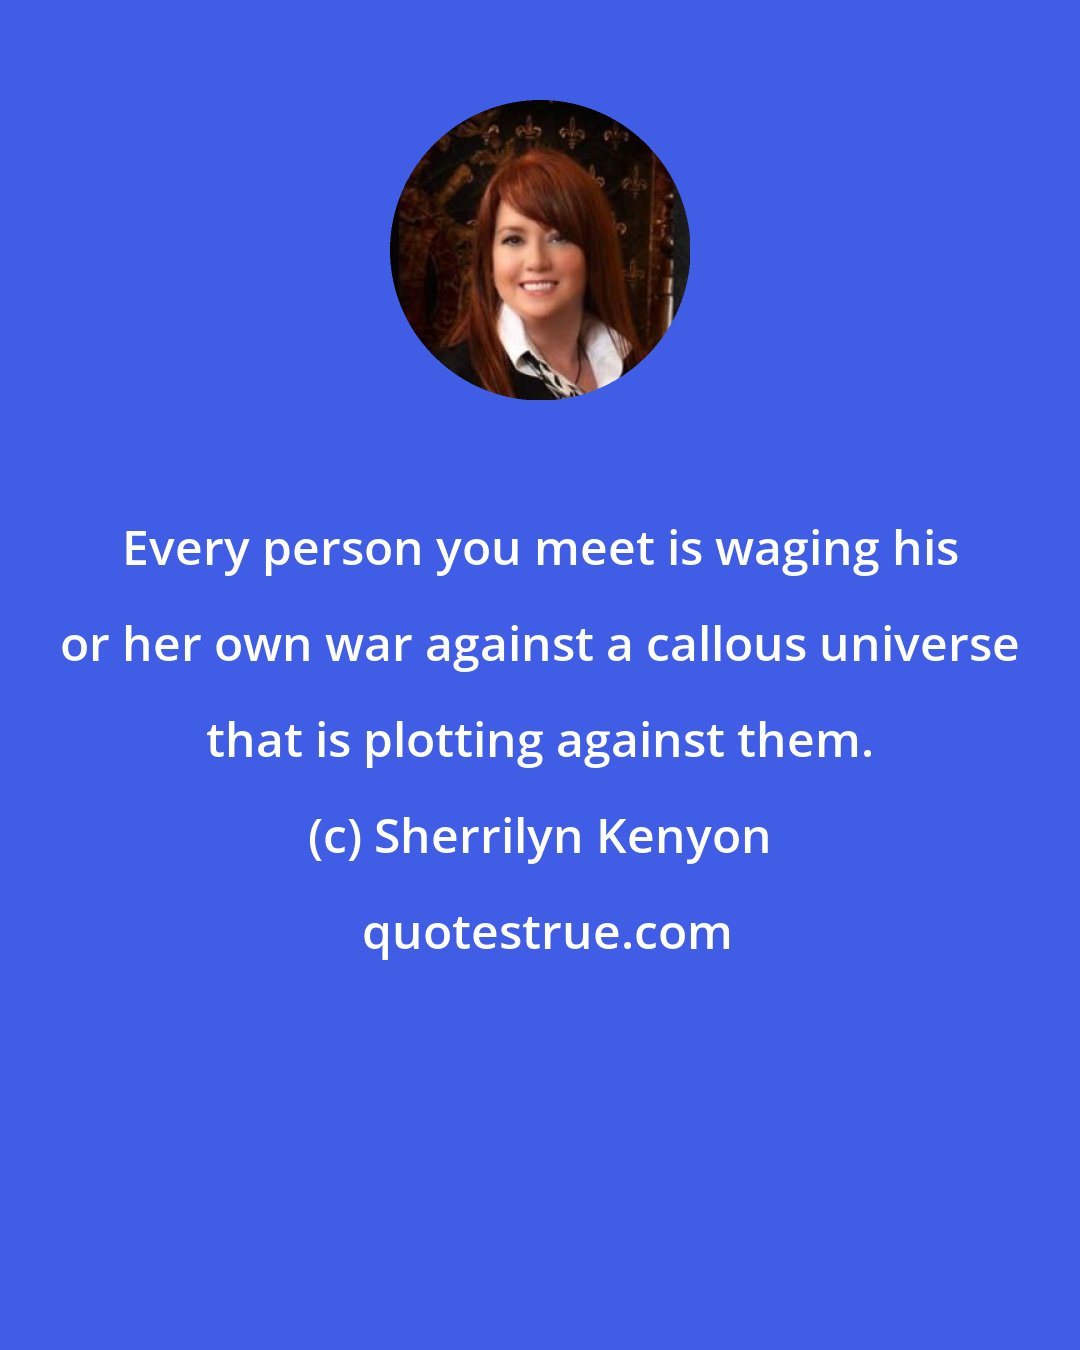 Sherrilyn Kenyon: Every person you meet is waging his or her own war against a callous universe that is plotting against them.